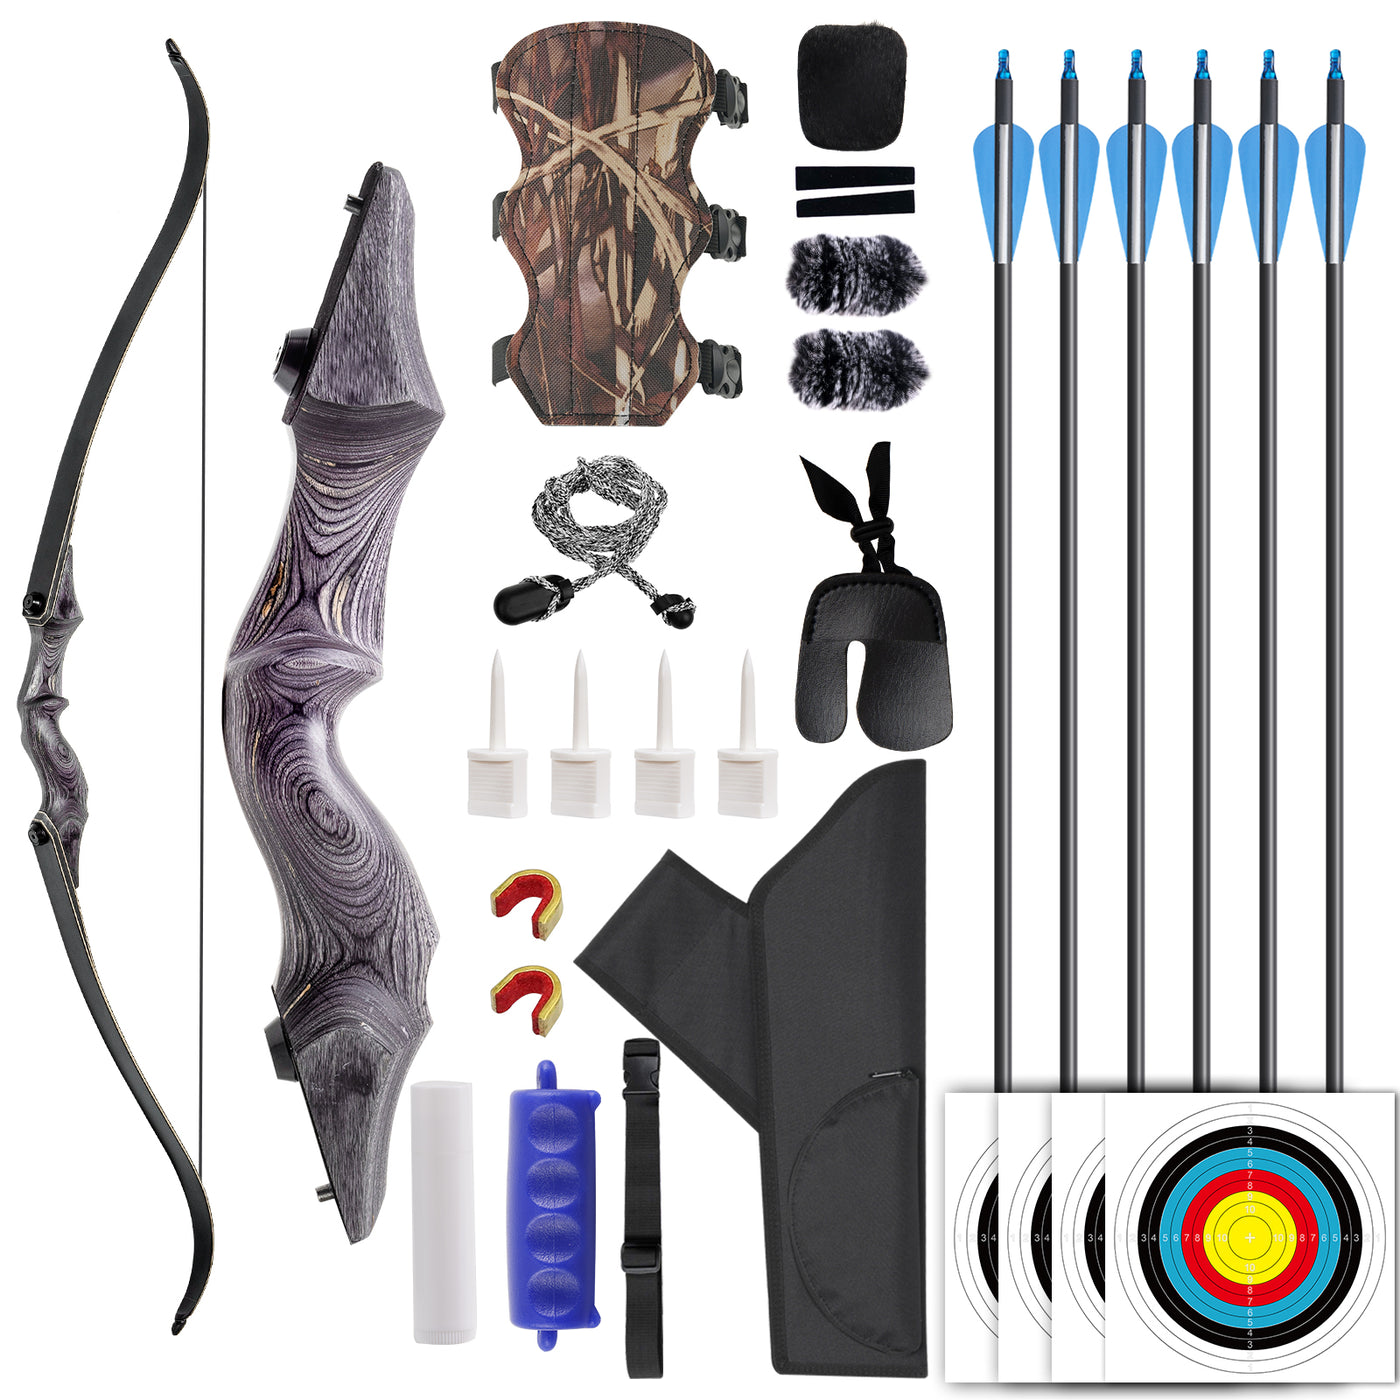 F178 58“ Takedown Recurve Bow Set Wooden Riser Bow For Adults, 30-50 lbs